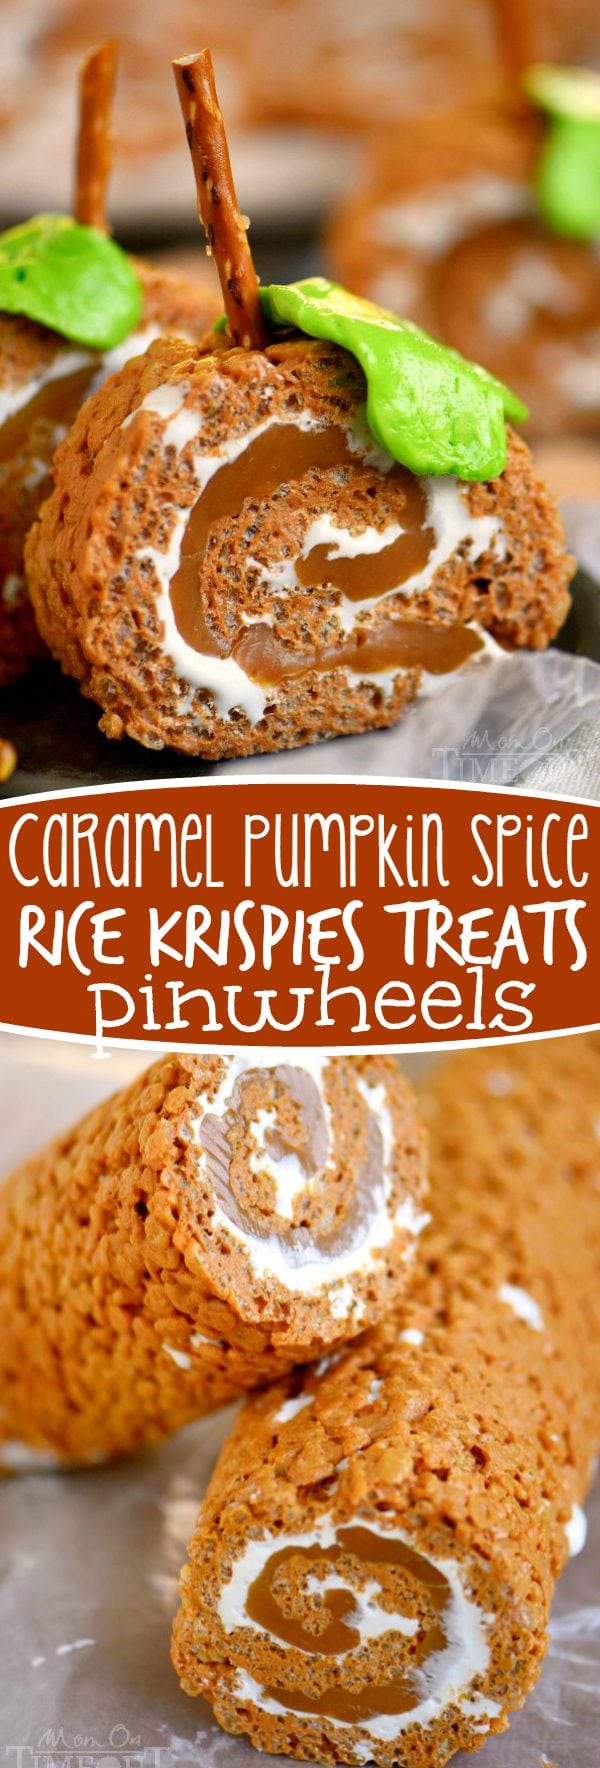 Caramel Pumpkin Spice Rice Krispies Treats Pinwheels - my new favorite fall treat! Amazing flavors, totally fun - what's not to love?